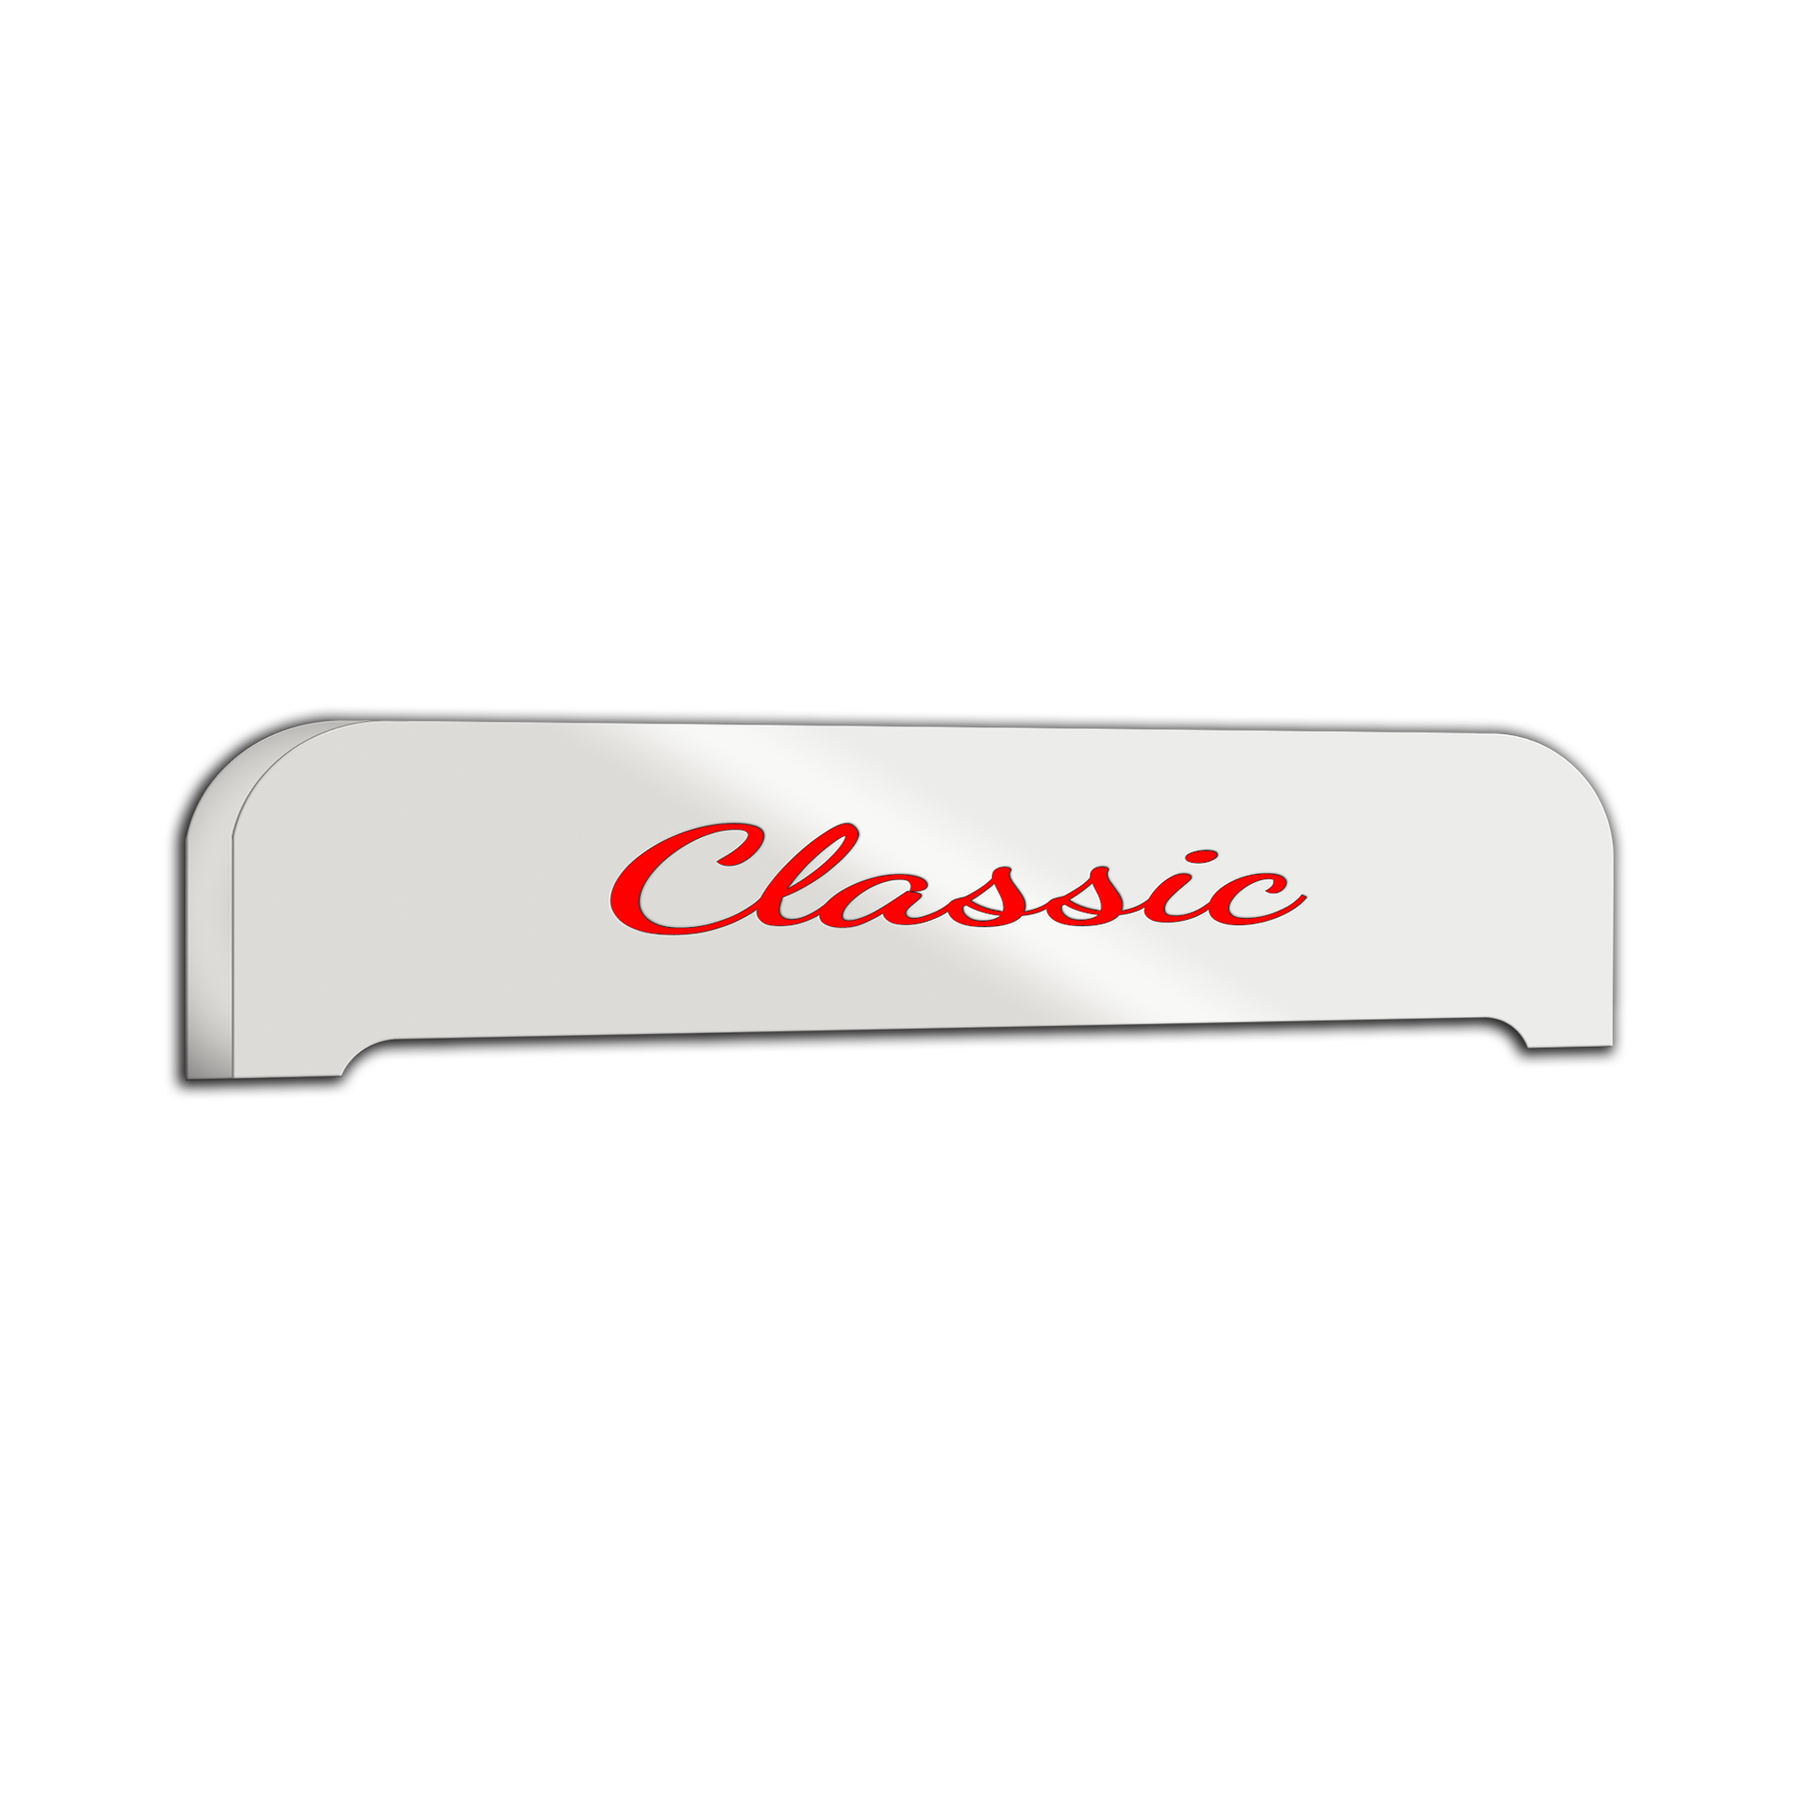 Freightliner Classic Top Of Chasis Air Bag Cover Light Box